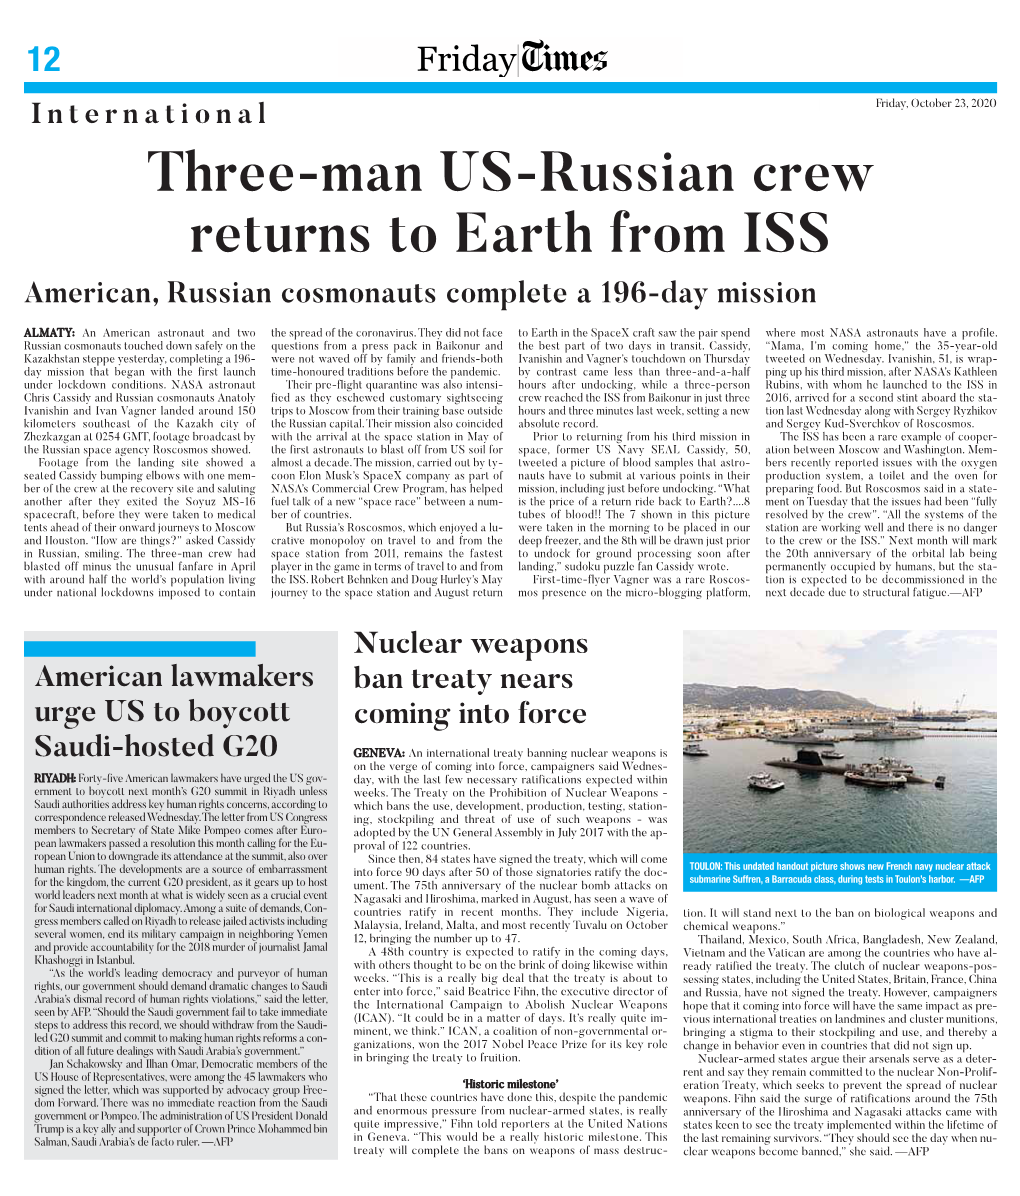 Three-Man US-Russian Crew Returns to Earth from ISS American, Russian Cosmonauts Complete a 196-Day Mission